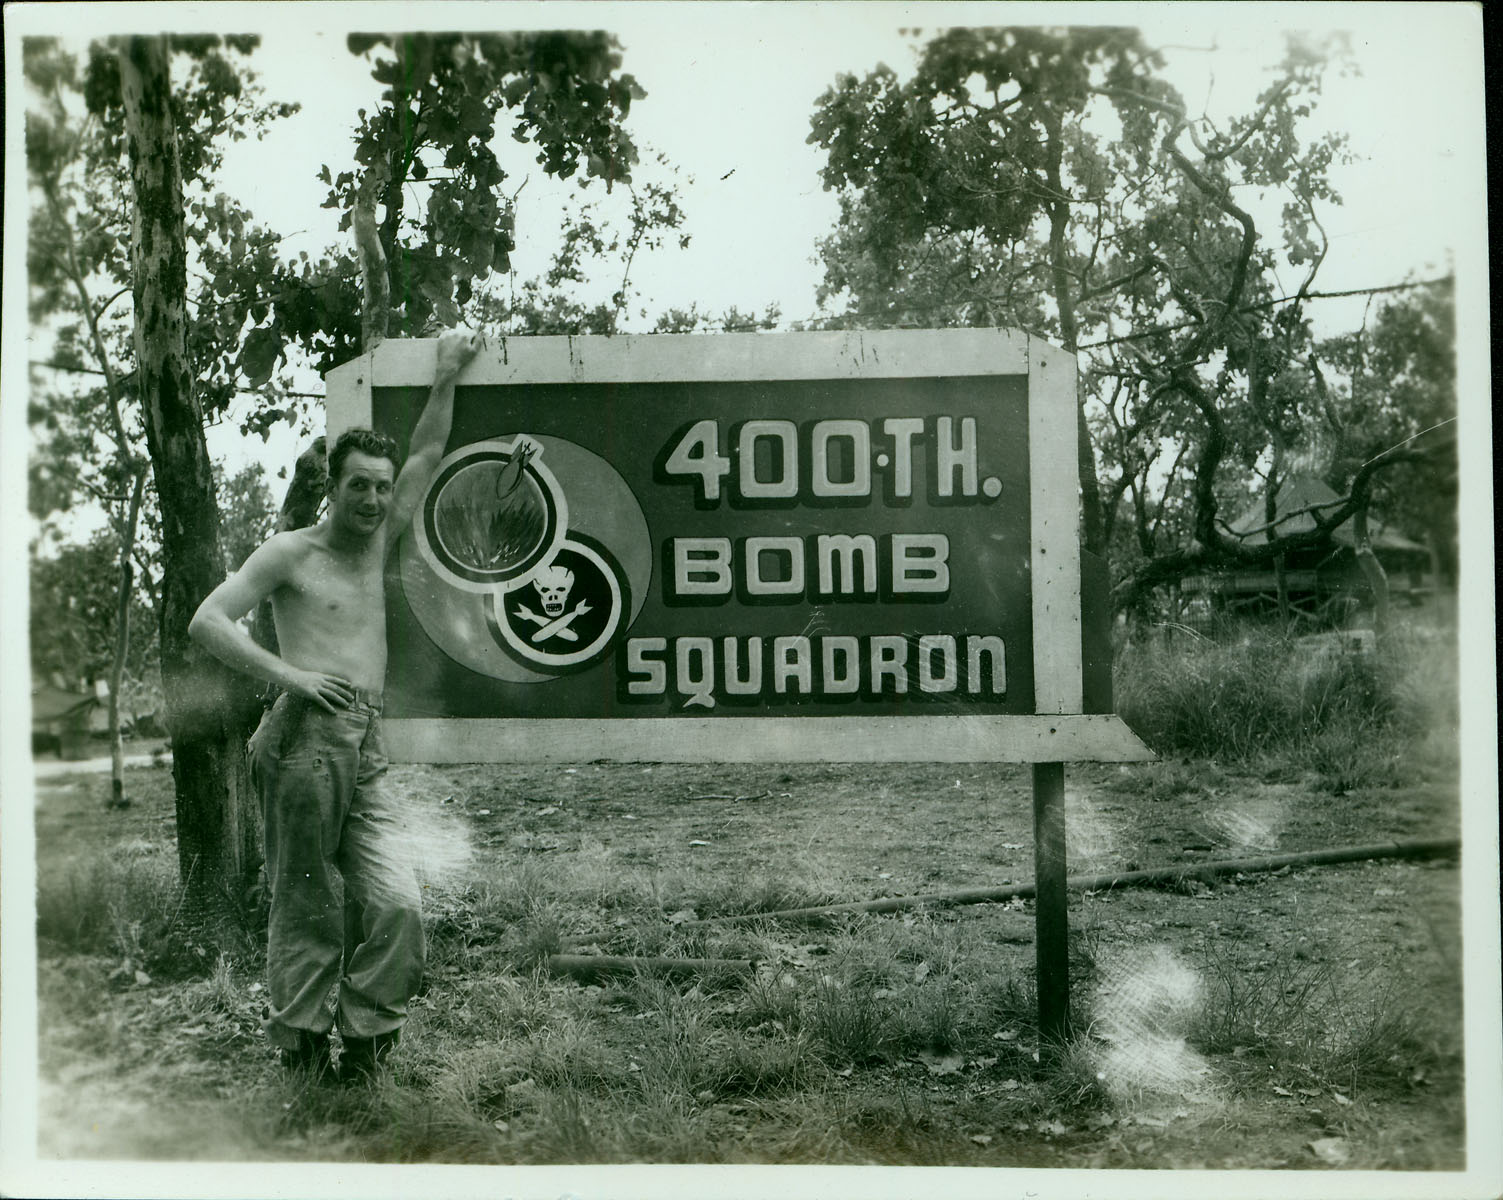 An Army officer poses in front of a base sign for the “400th Bomb Squadron”.